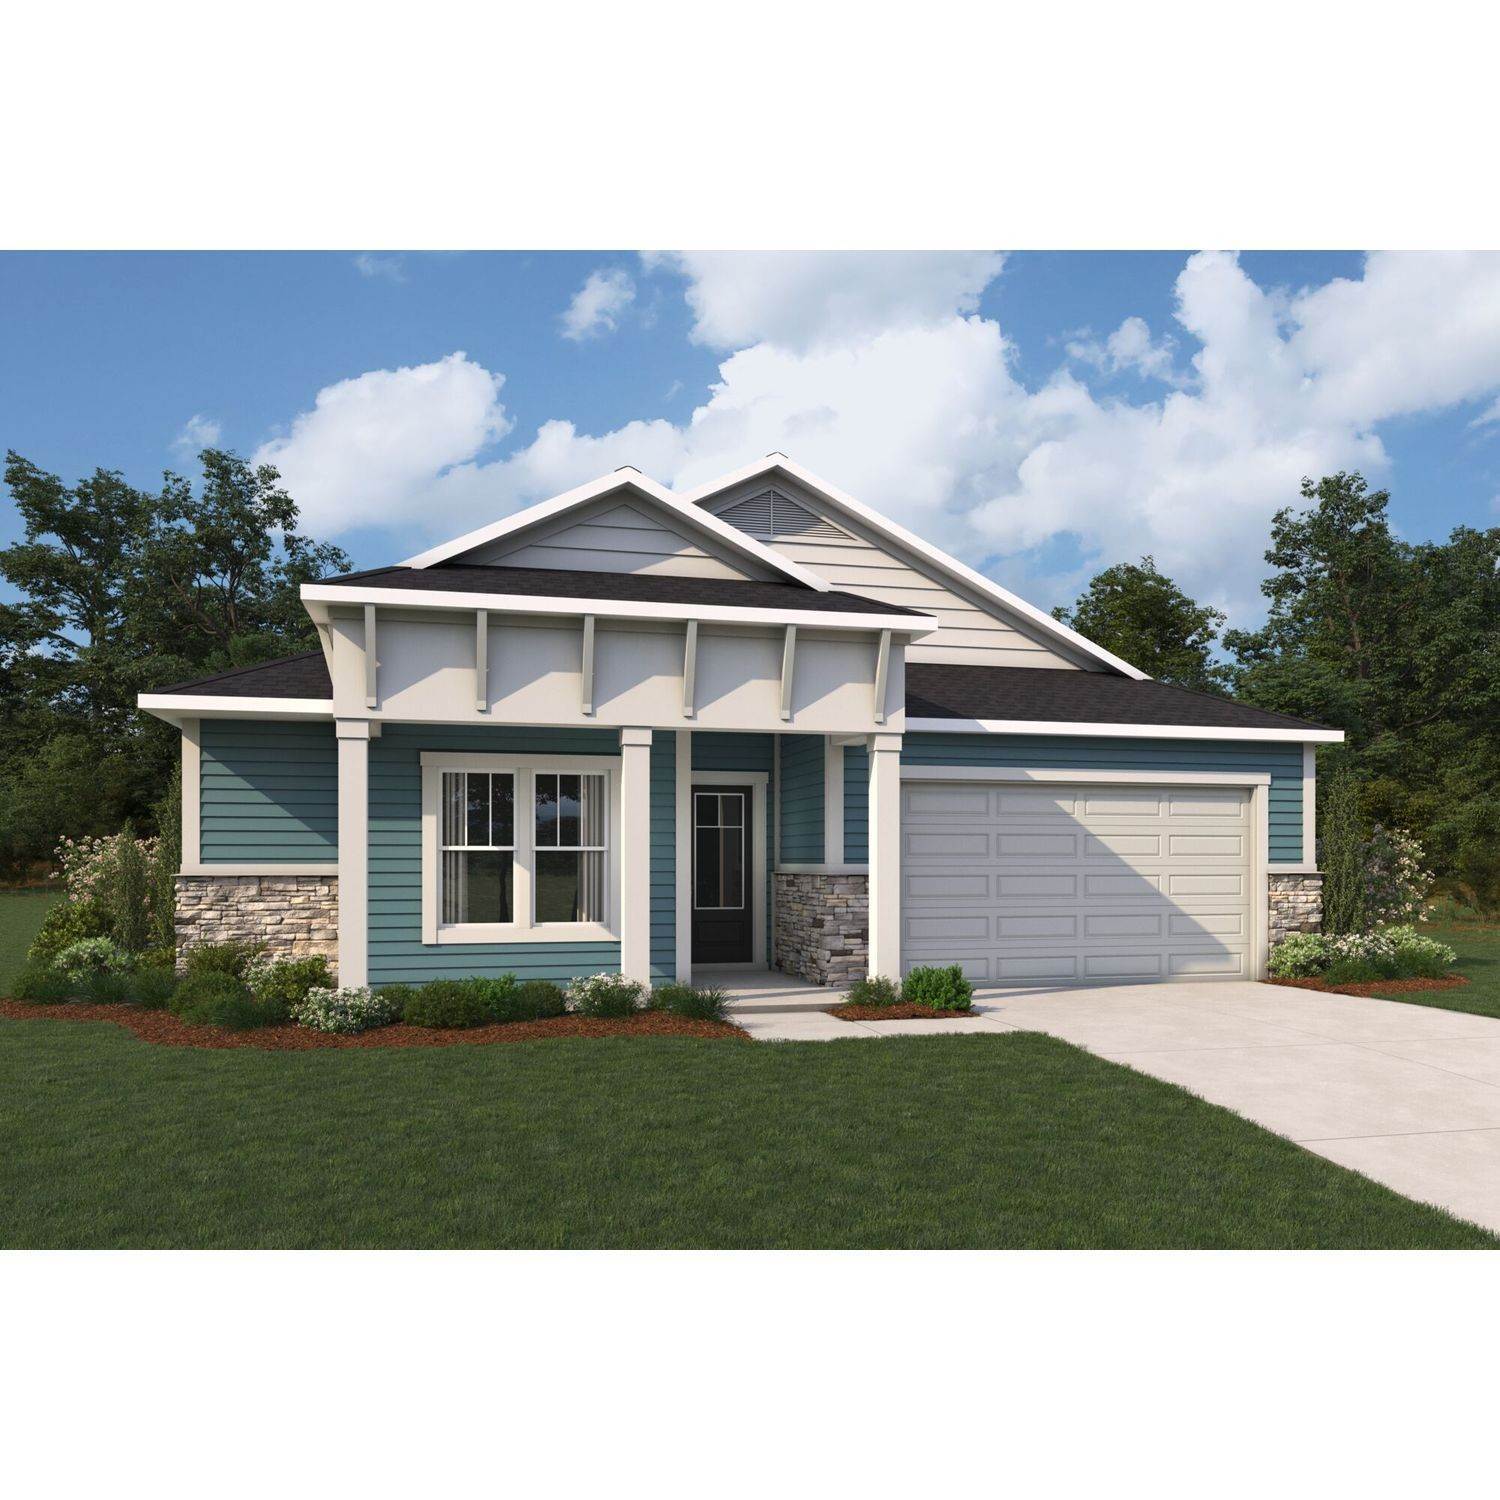 Single Family for Sale at St. Johns, FL 32259